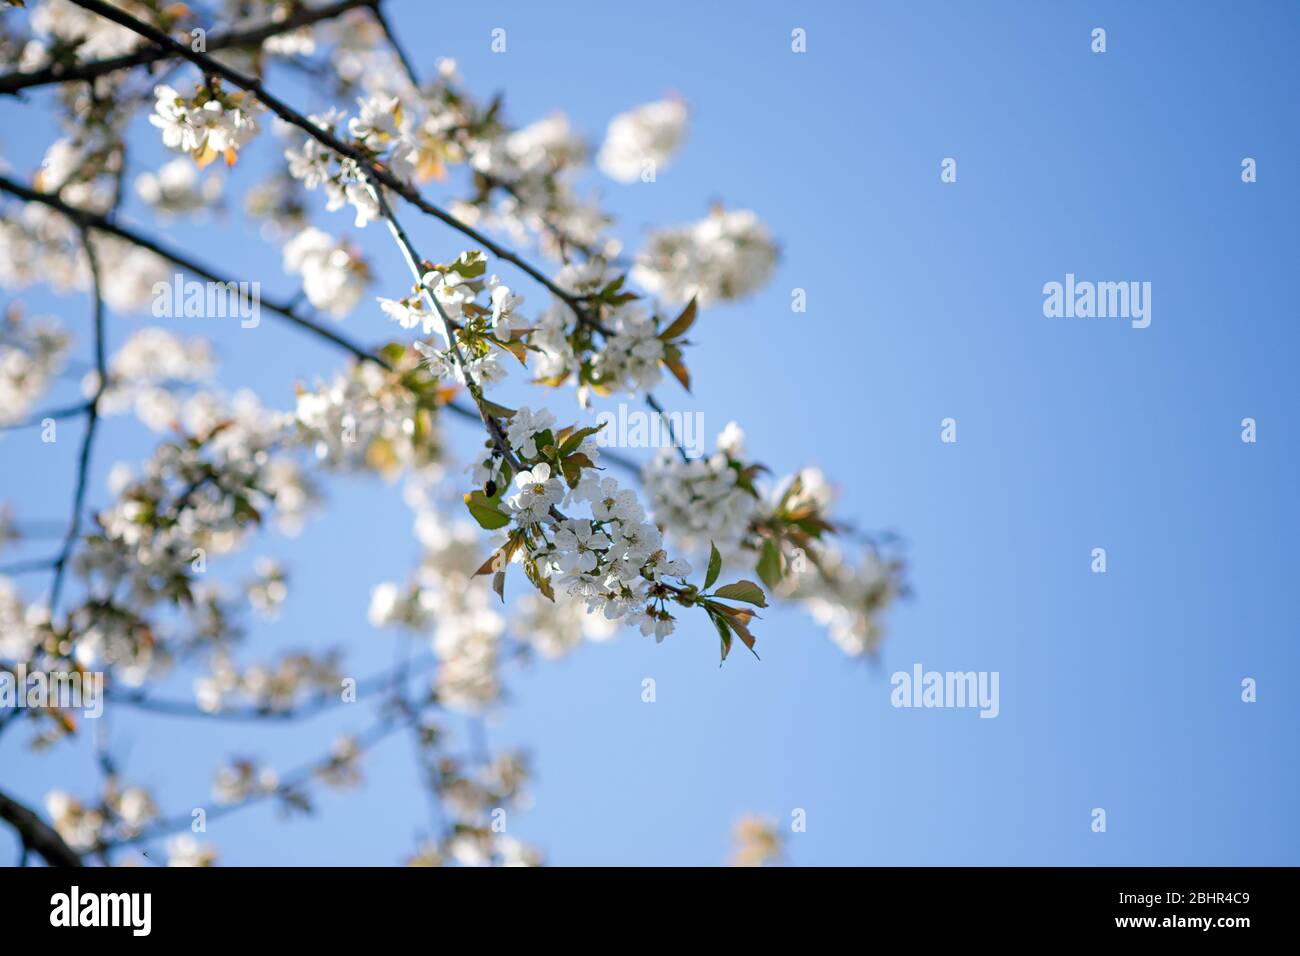 Apple blossom branches on blue sky Stock Photo